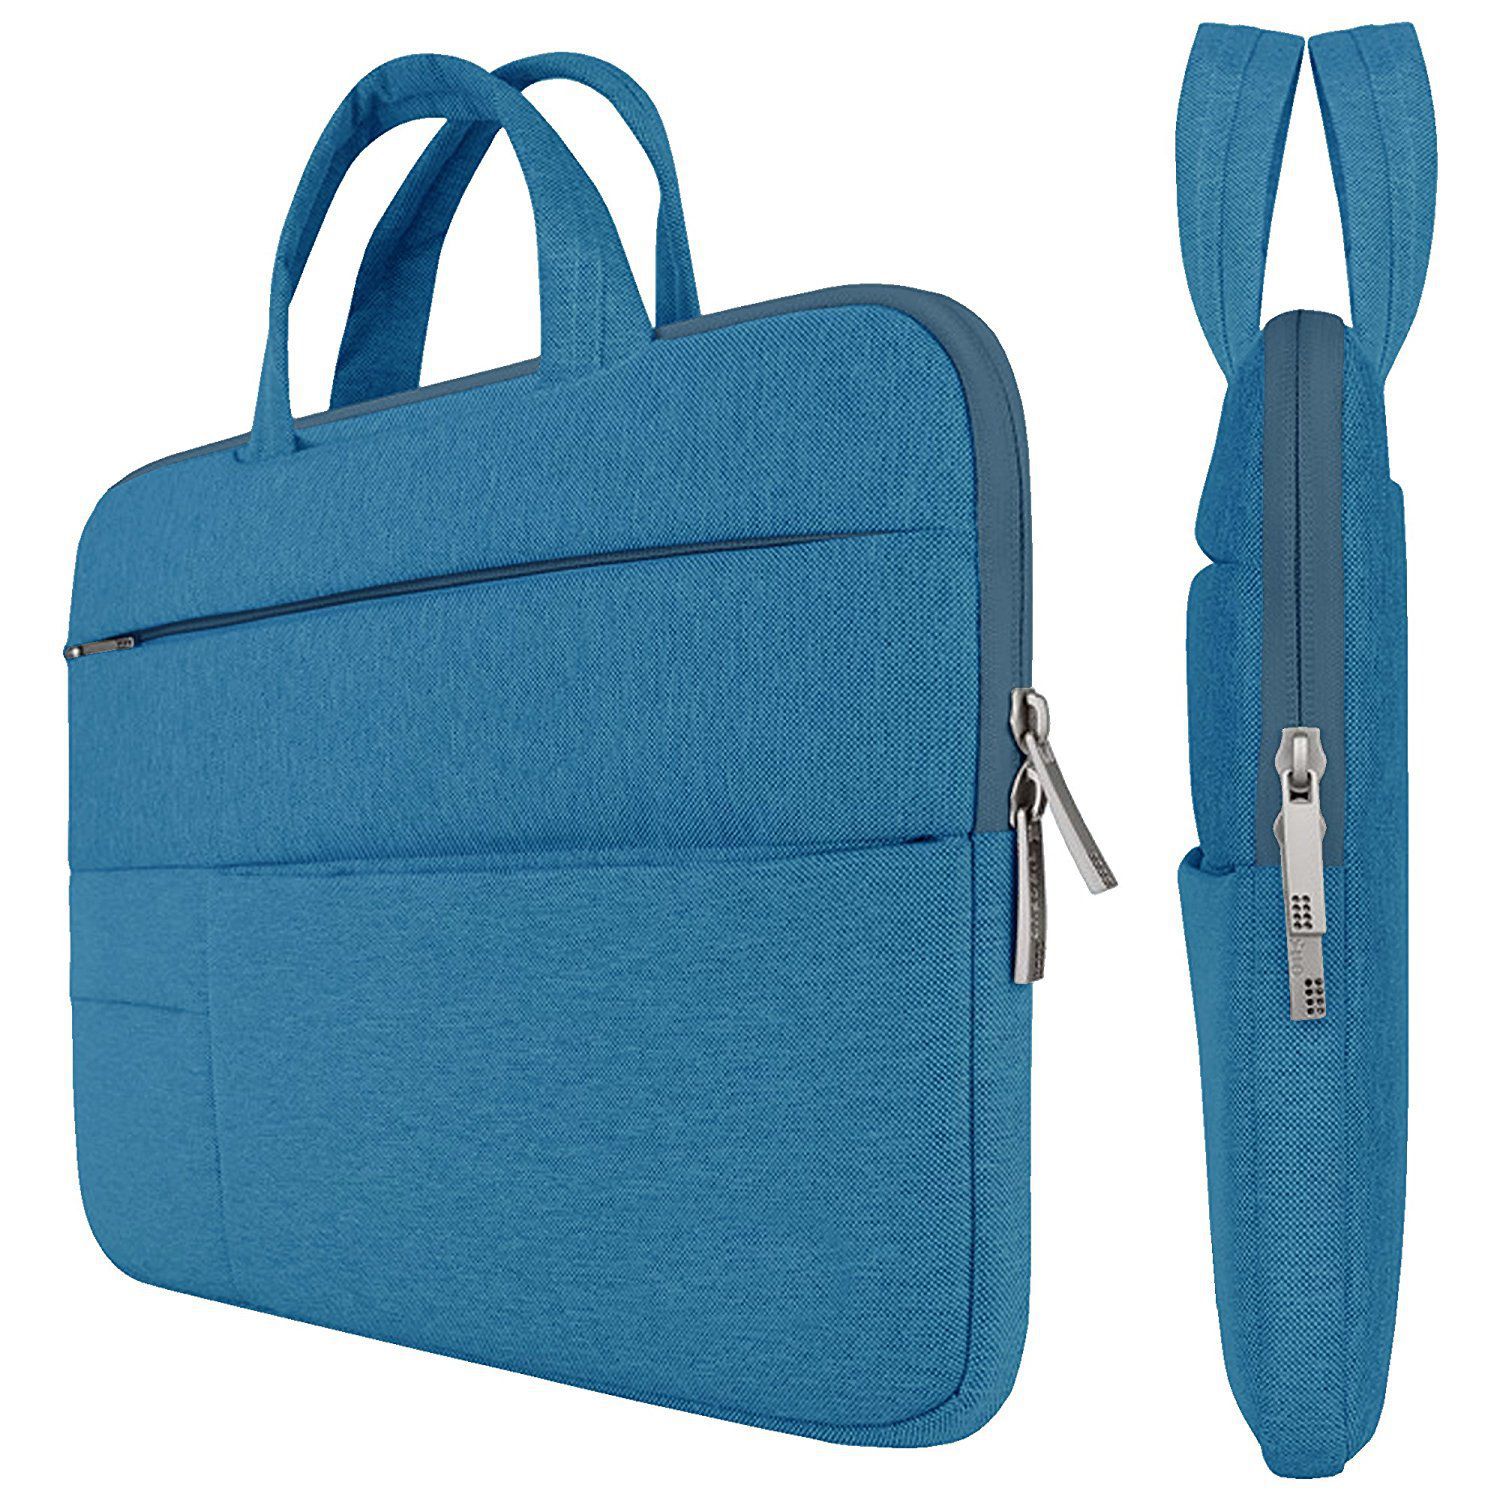 Probus Canvas Laptop Bag Sleeve for 14 Inch - Blue - Buy Probus Canvas ...